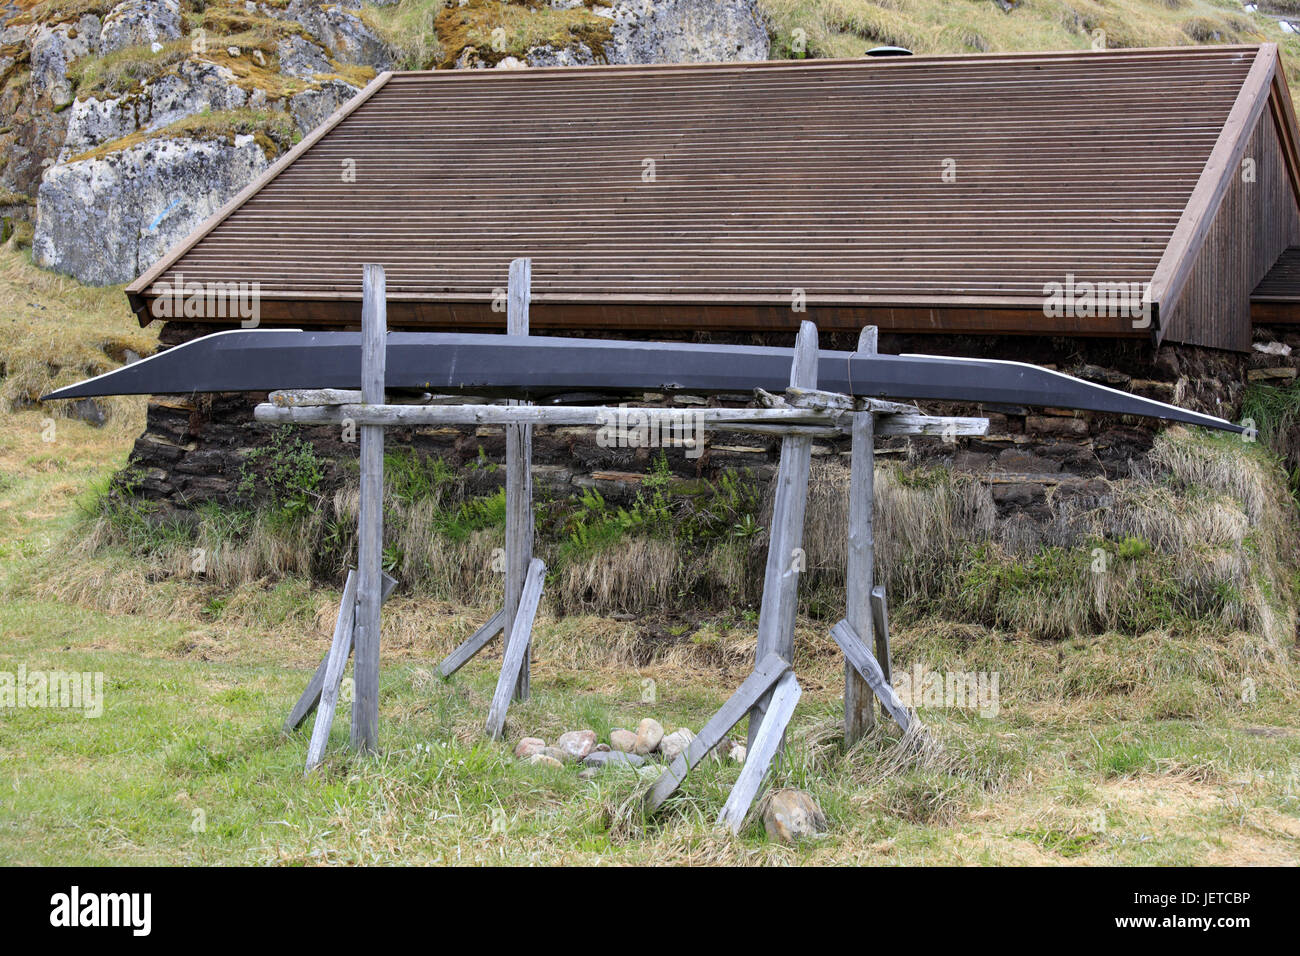 Greenland, Sisimiut, museum, mounting, kayak, historically, Western Greenland, town, destination, place of interest, culture, outside, Inuit, Inuit culture, architecture, wooden hut, wooden rack, device, deserted, stand, Stock Photo